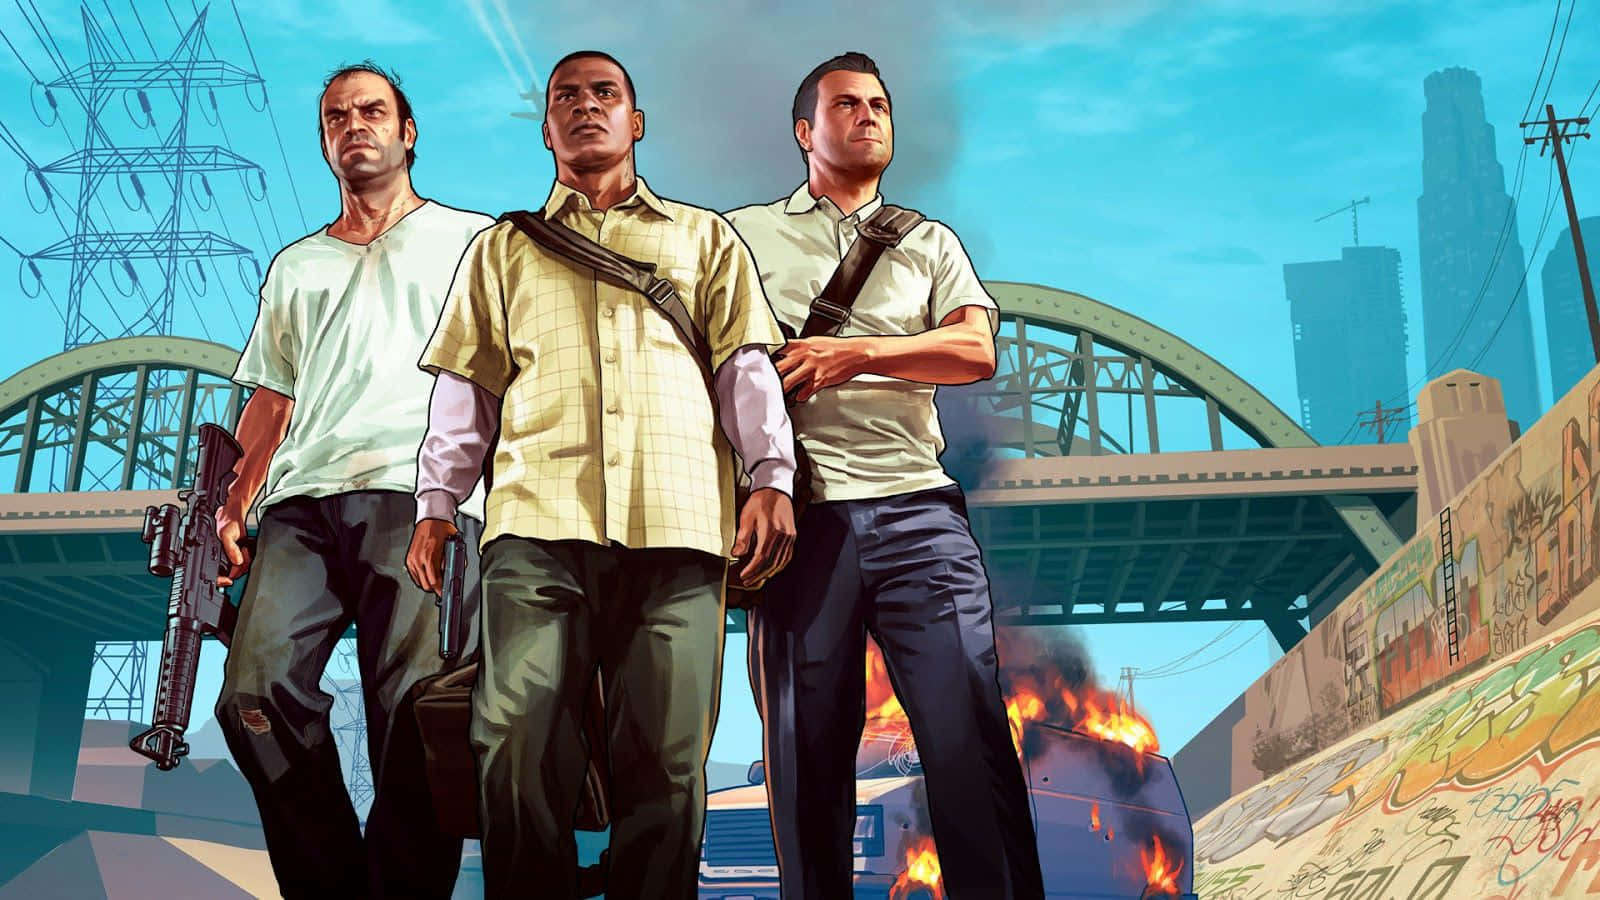 Unite the gangs in Grand Theft Auto 5 and take control of Gameplay on Desktop Wallpaper